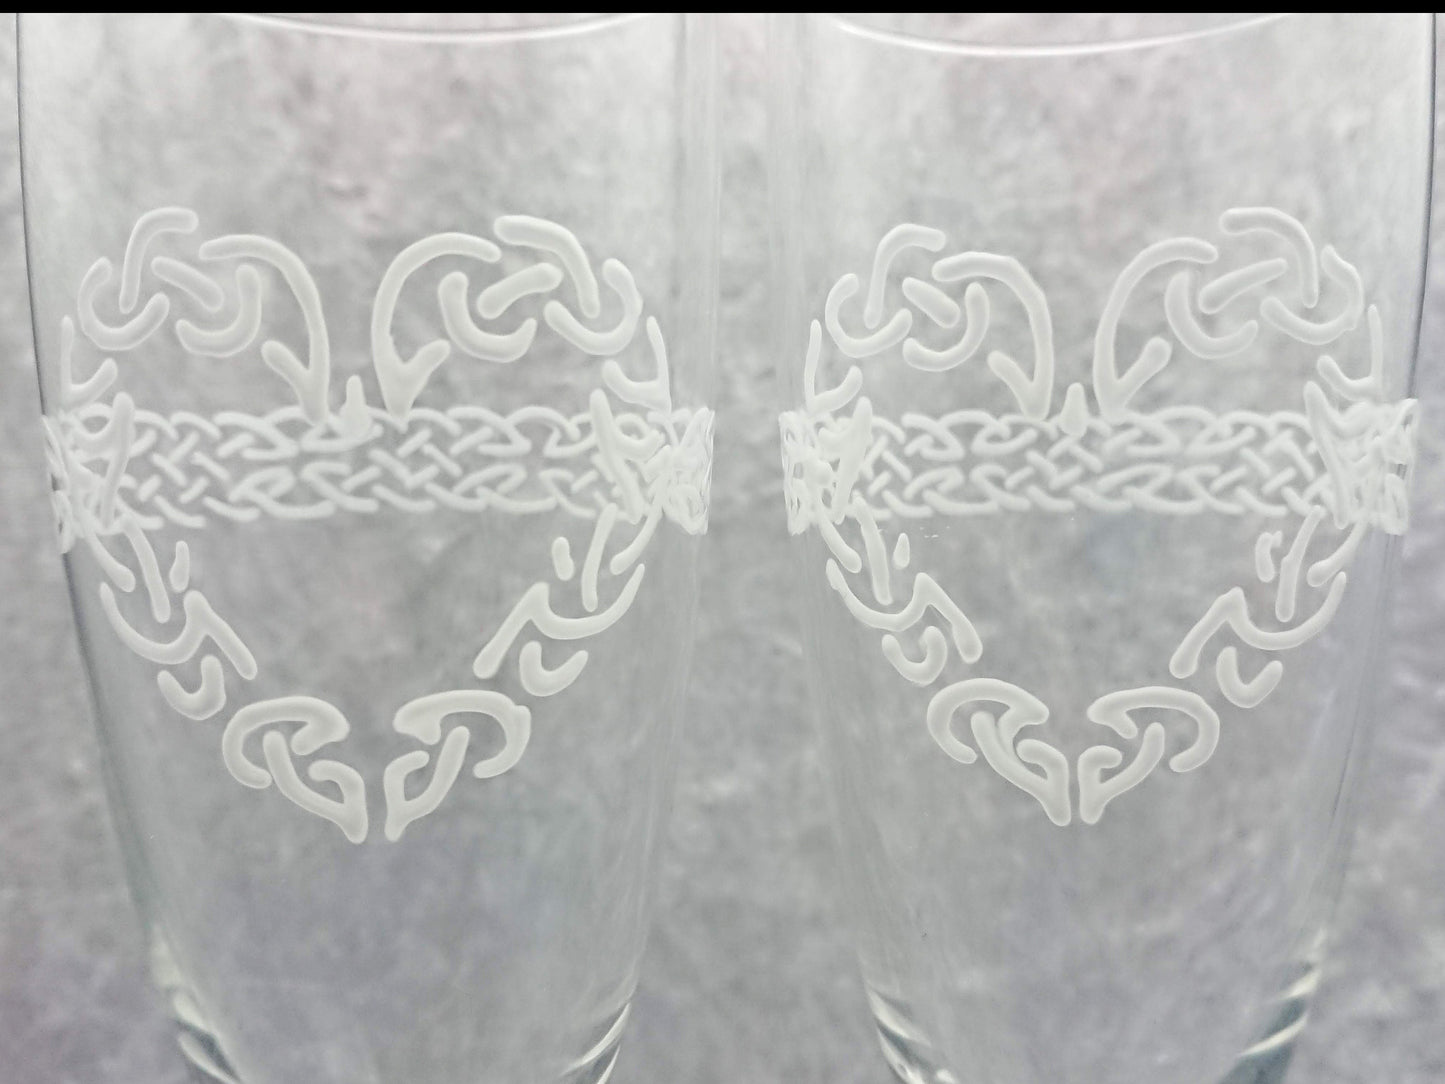 Hand-painted Celtic Heart Champagne Glasses in White